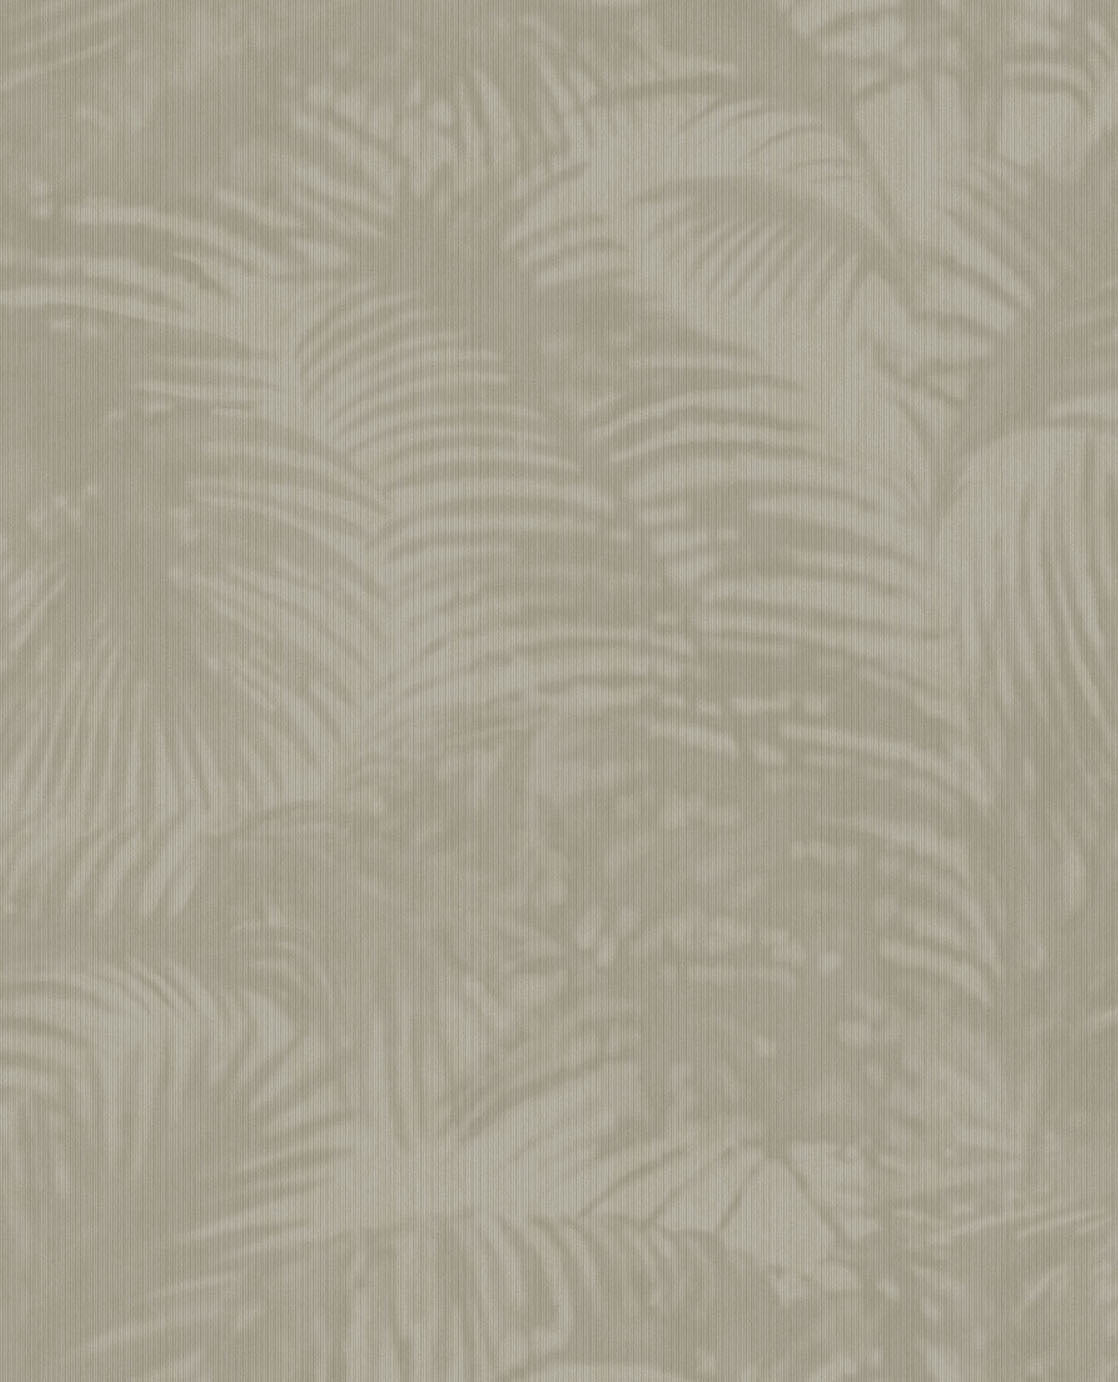 Blurry Palm Leaves - Greige